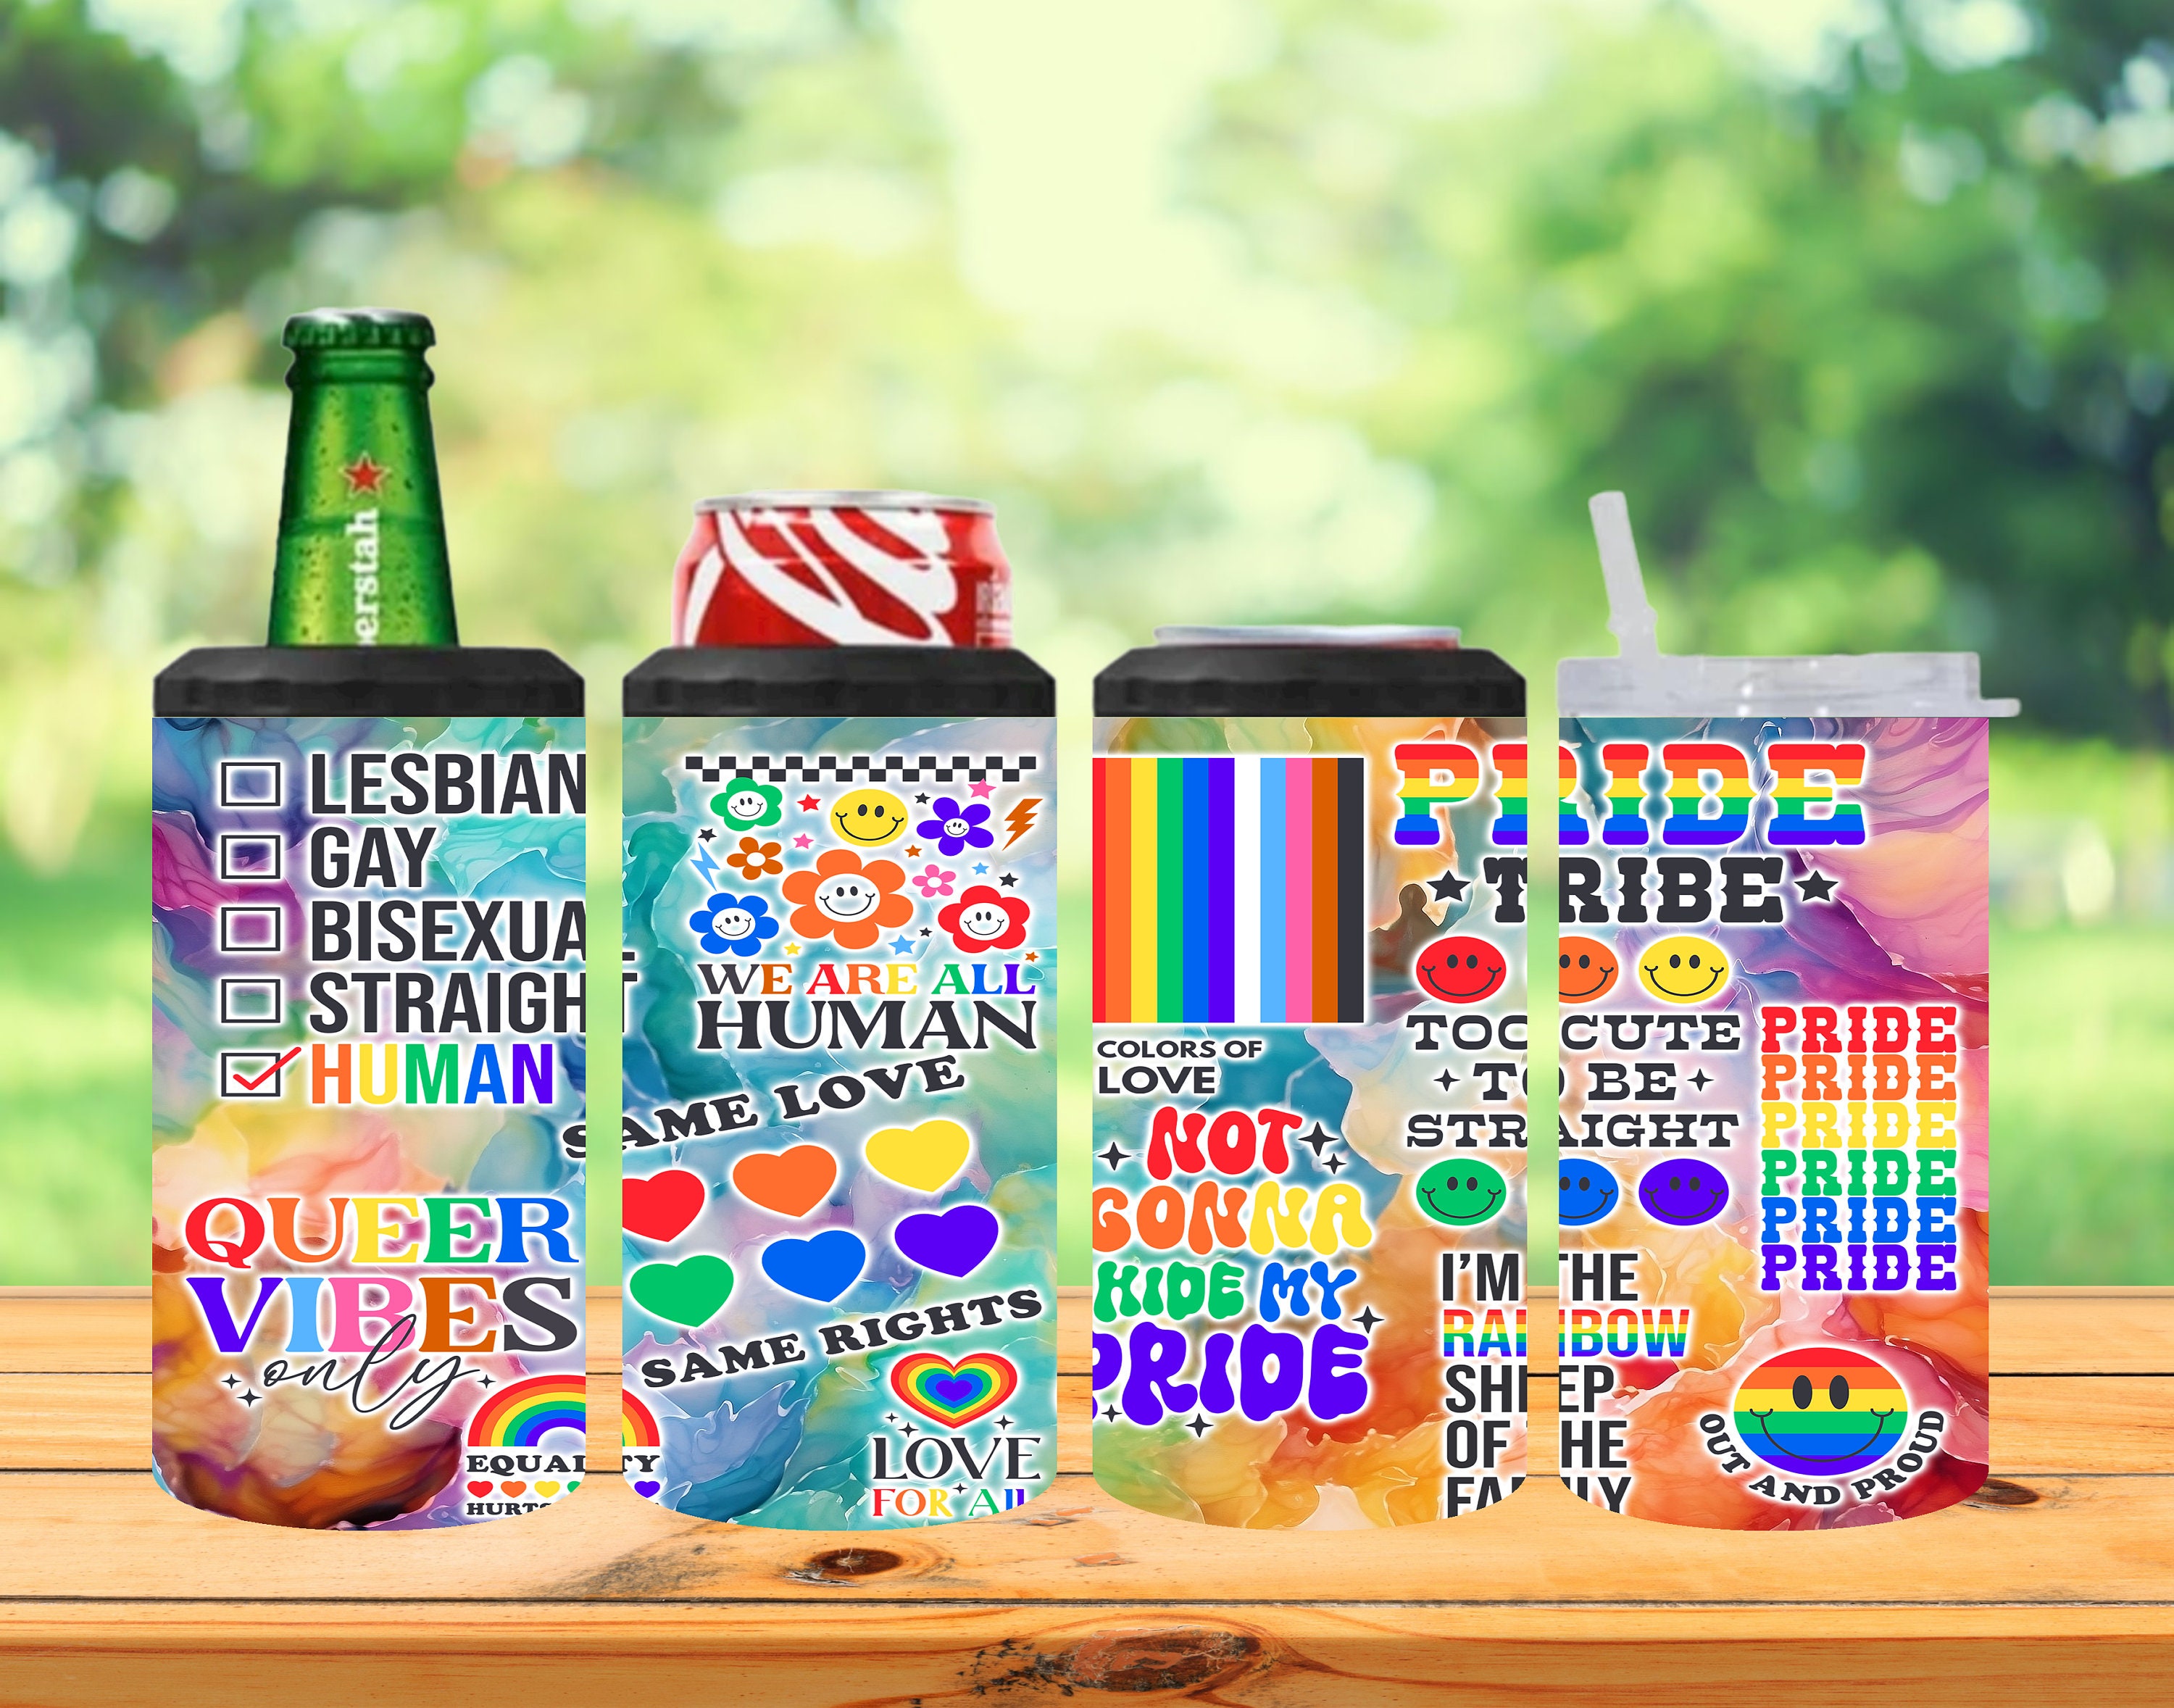 Sounds Gay I'm In, LGBTQ, Funny Can Cooler, Gay Pride, Neoprene